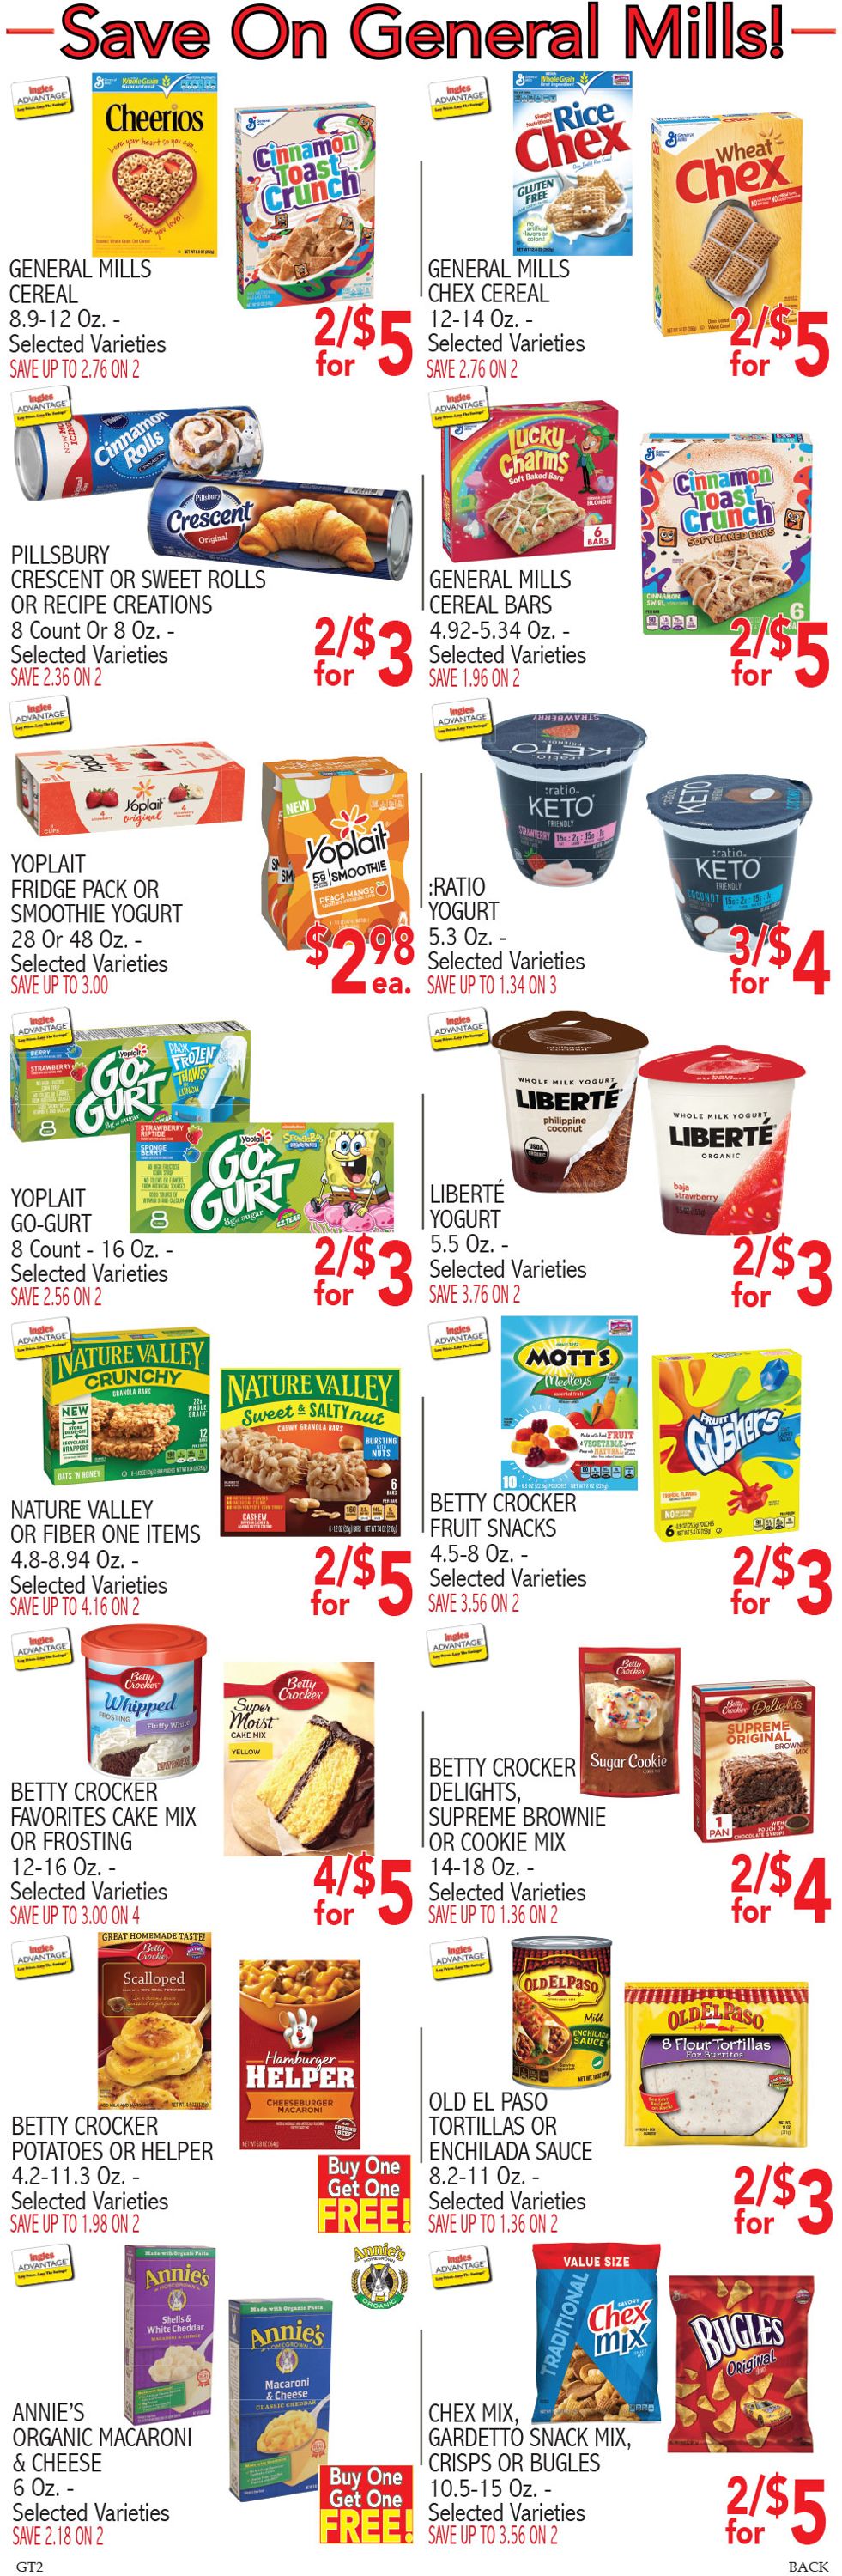 Ingles Ad from 03/10/2021